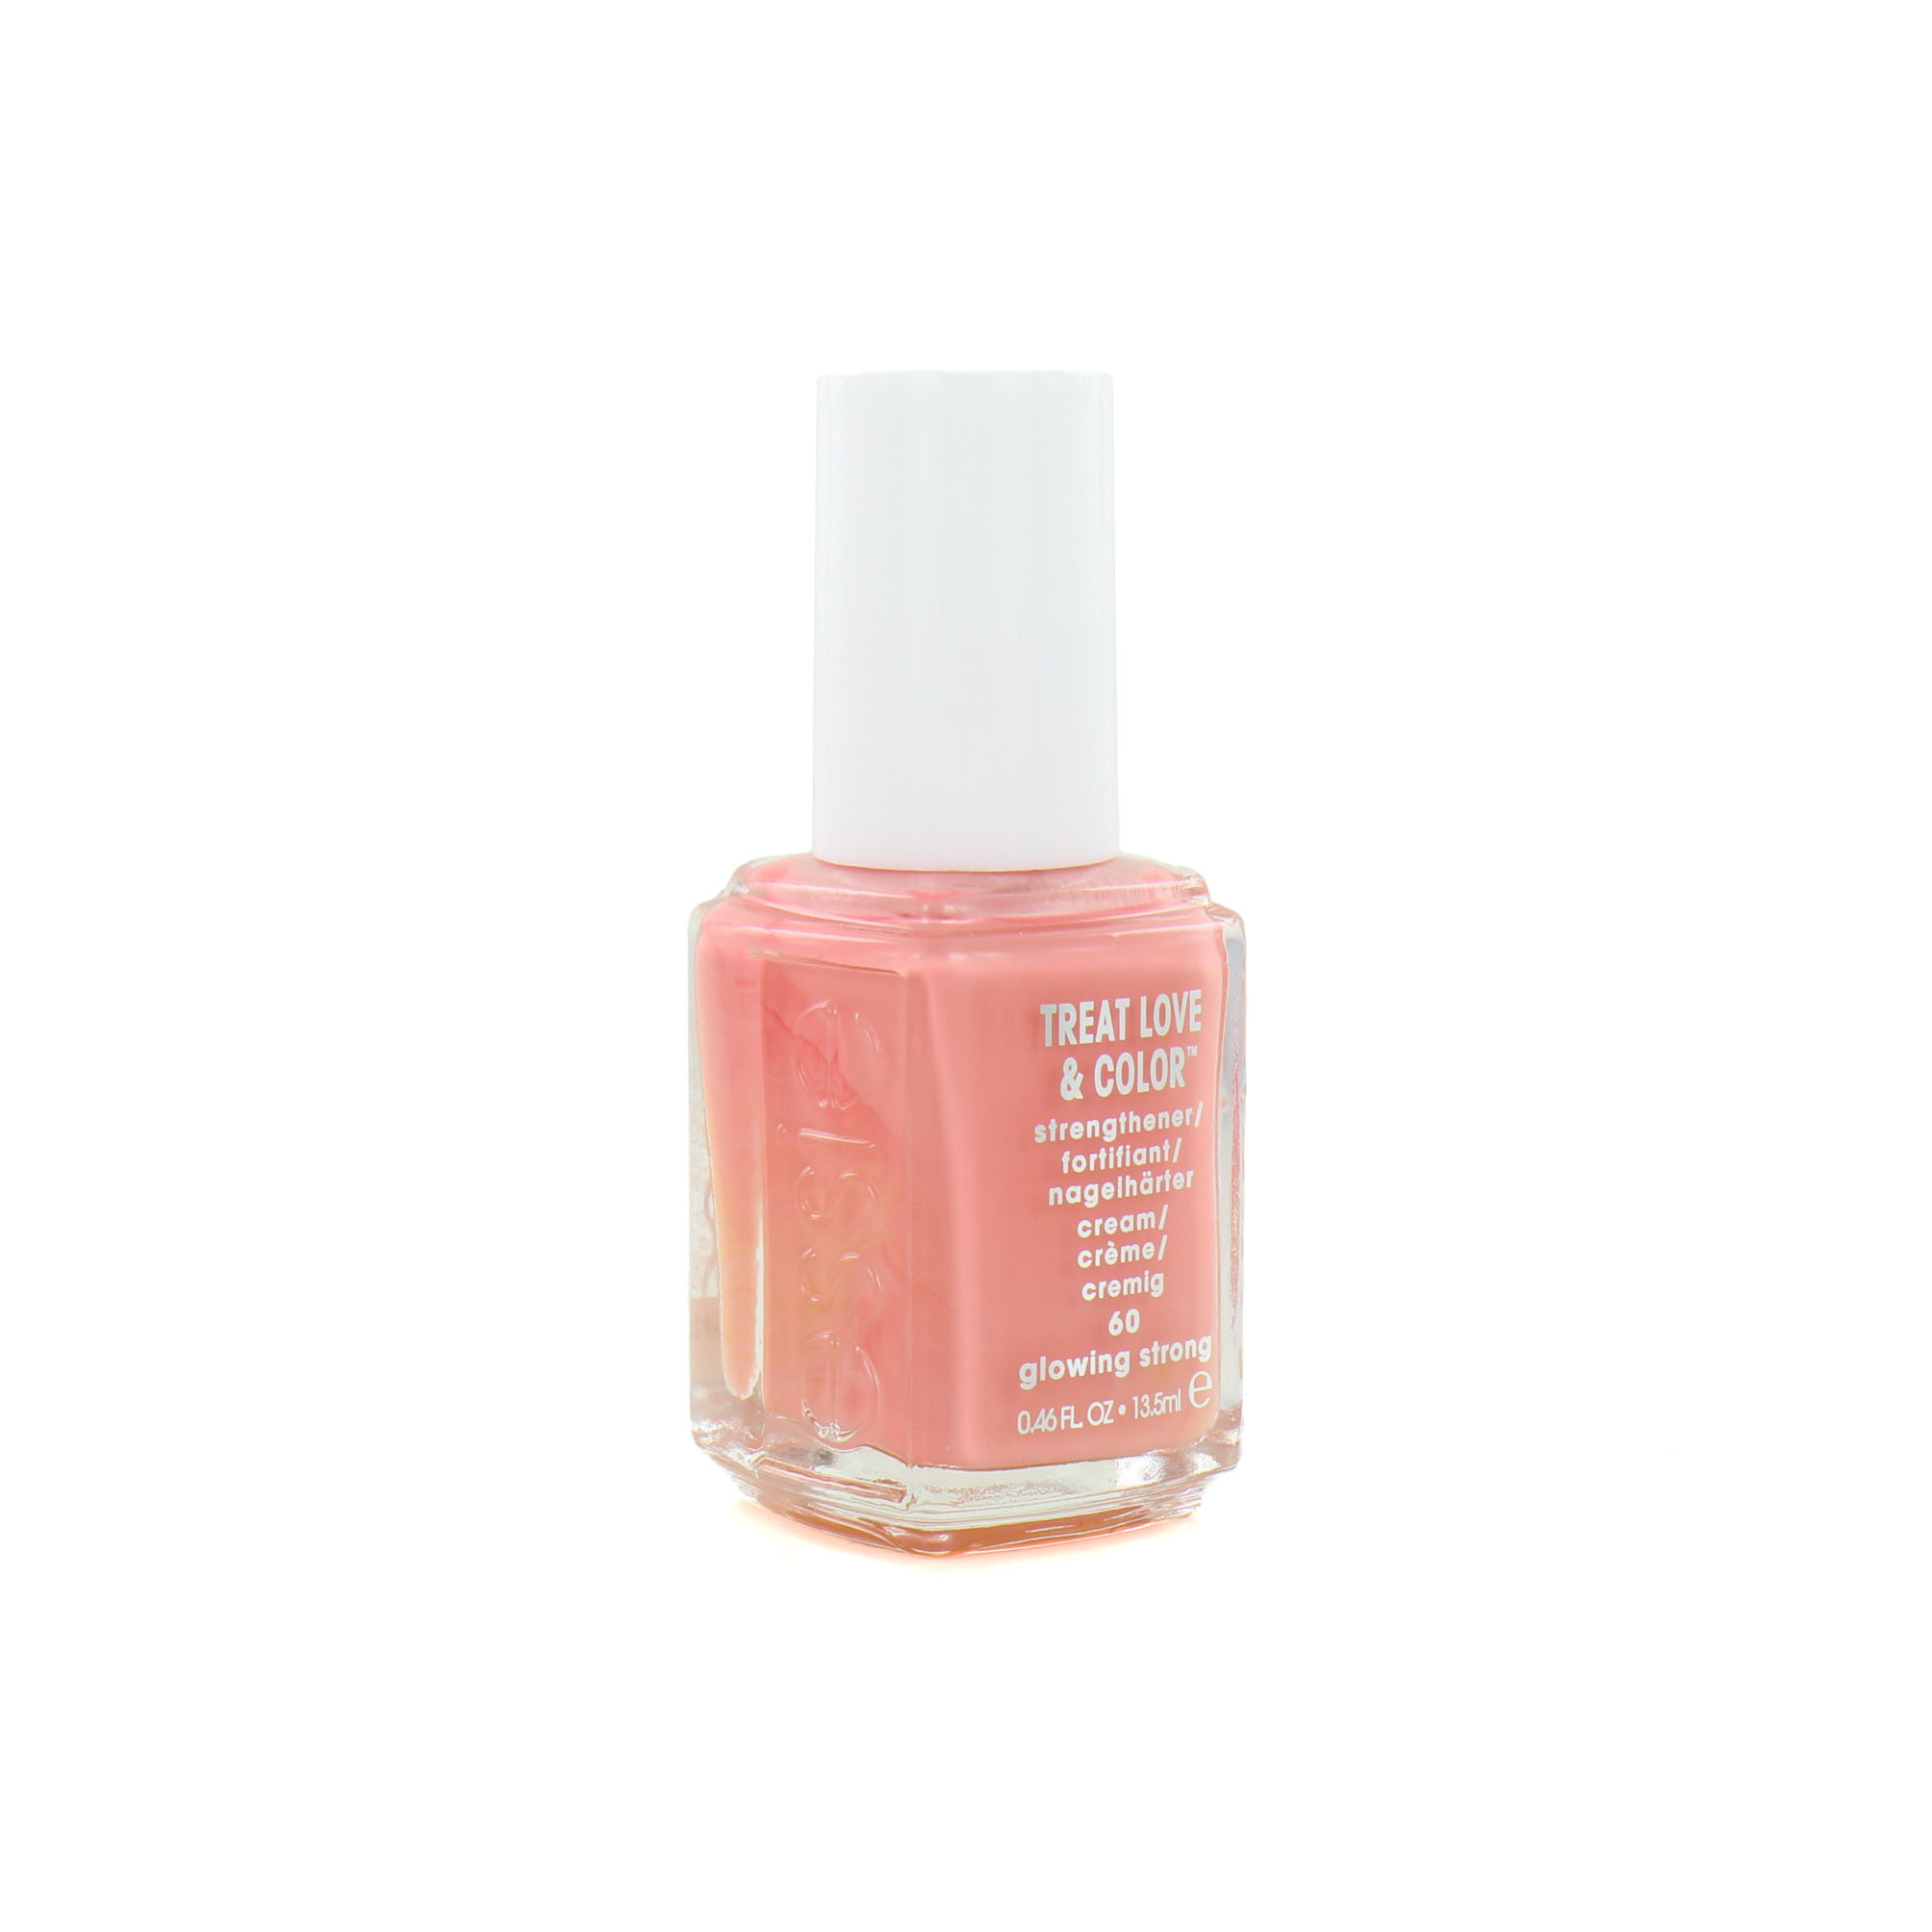 Essie Treat Love & Color Strengthener - 60 Glowing Strong Kaufen - Blisso